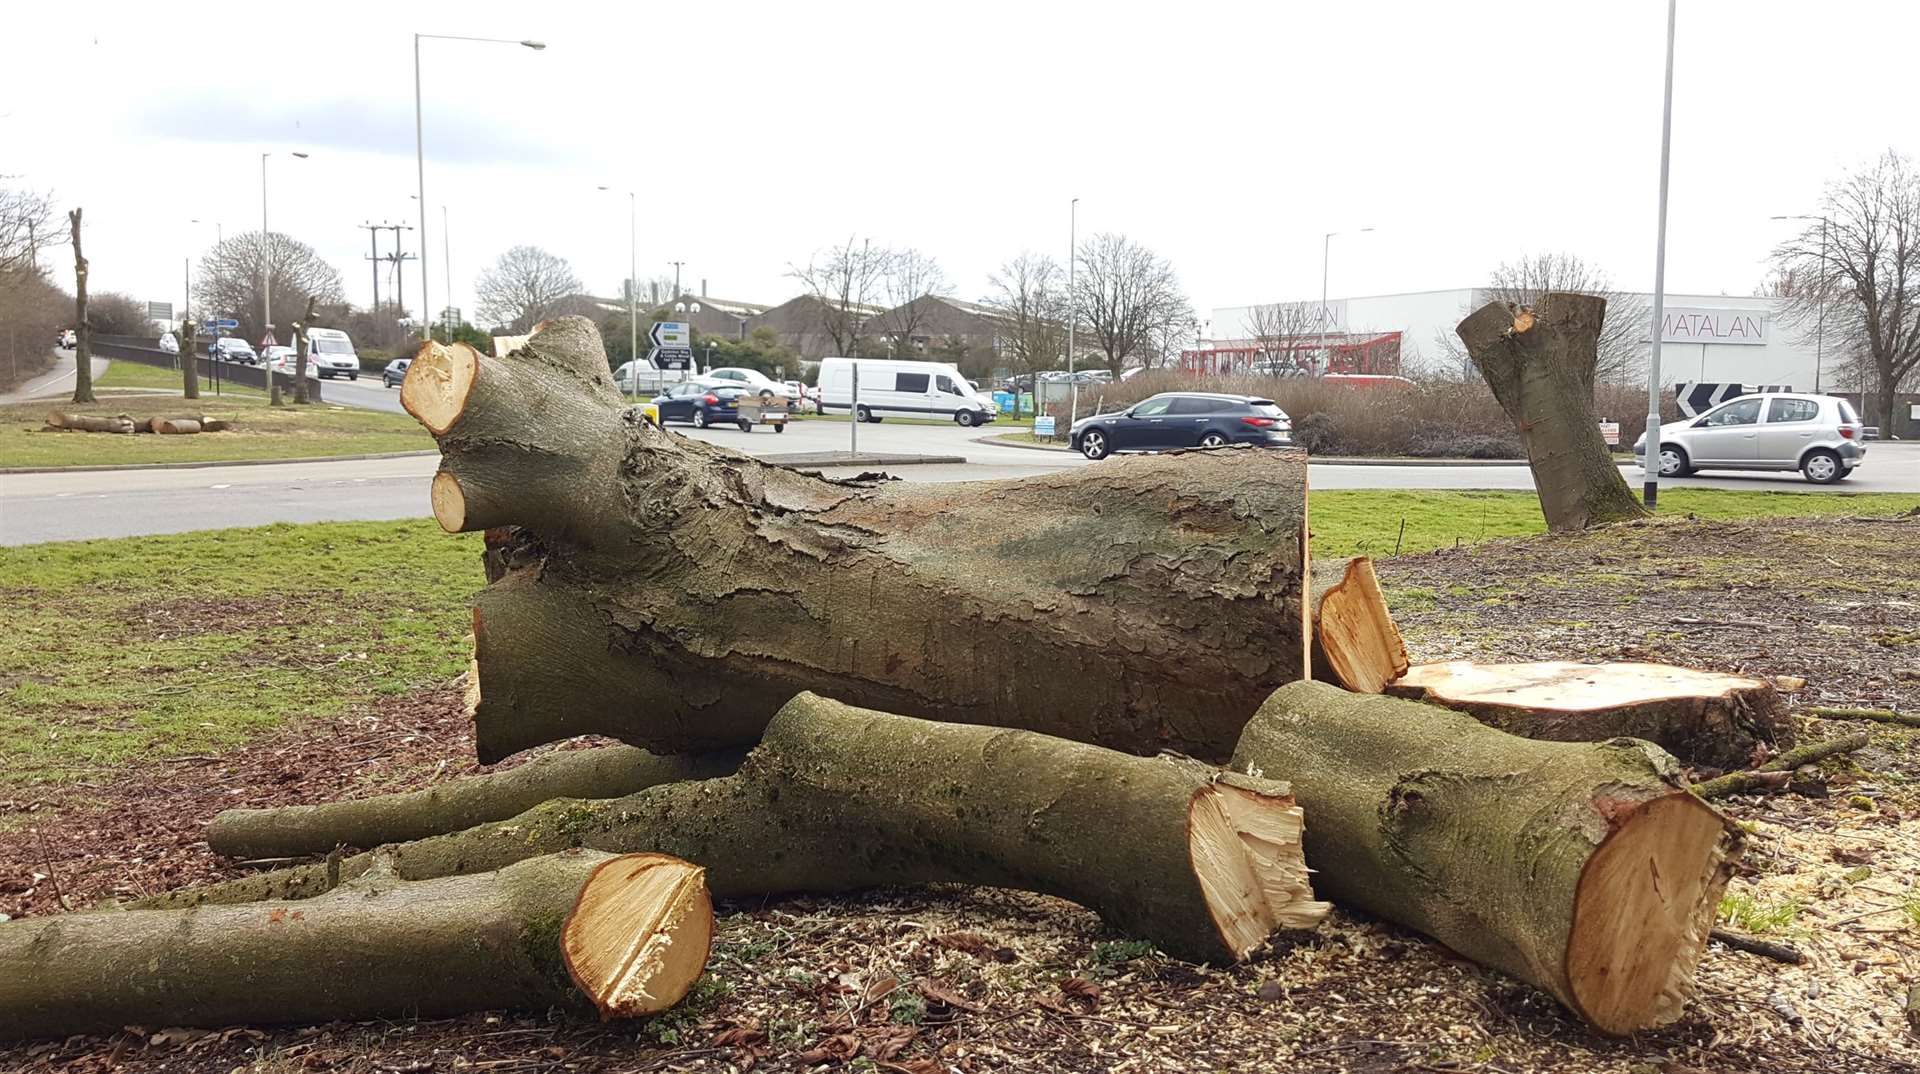 Trees were felled in 2018 but work on the dual carriageway is yet to begin